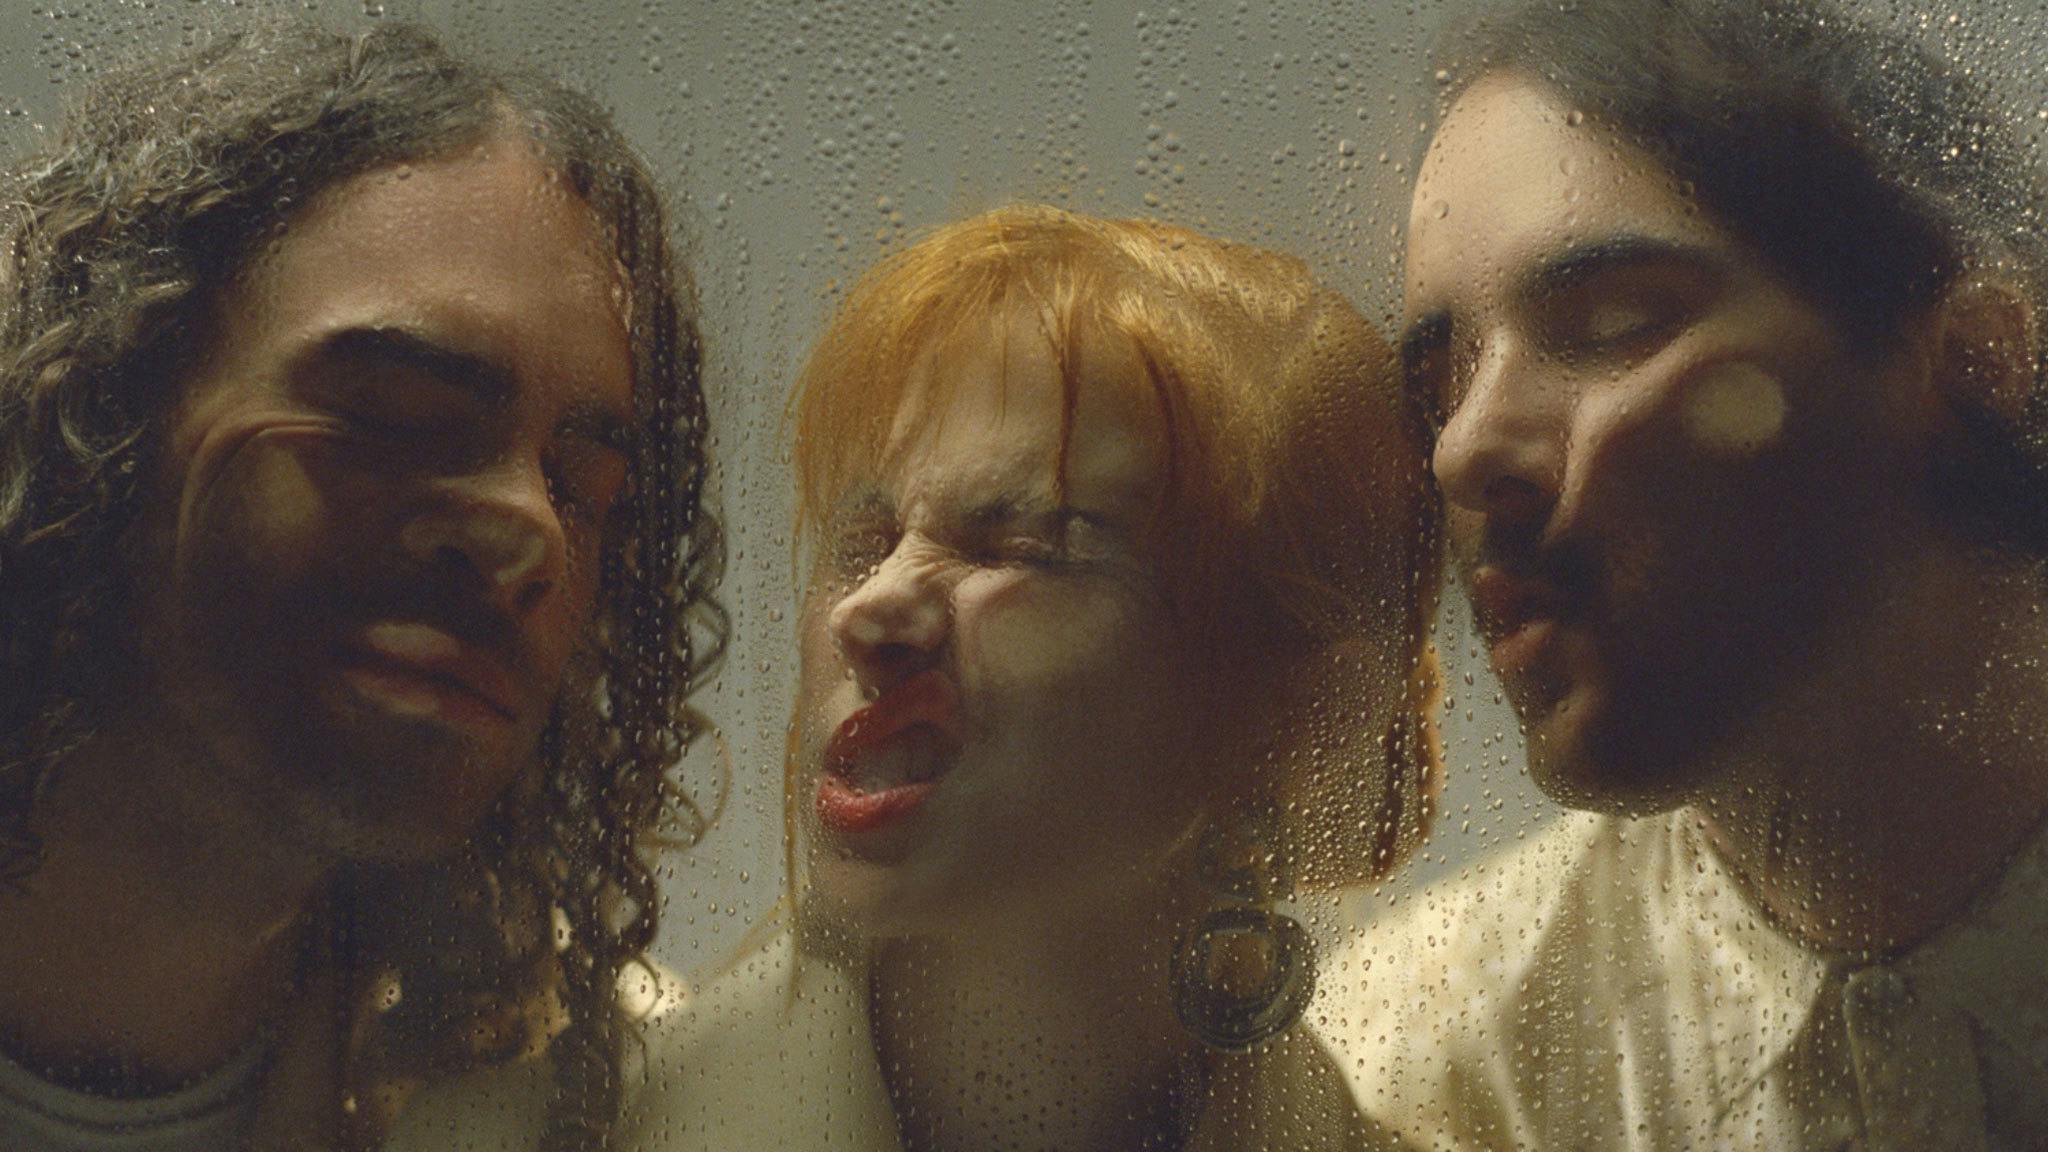 Listen to Paramore's new single This Is Why